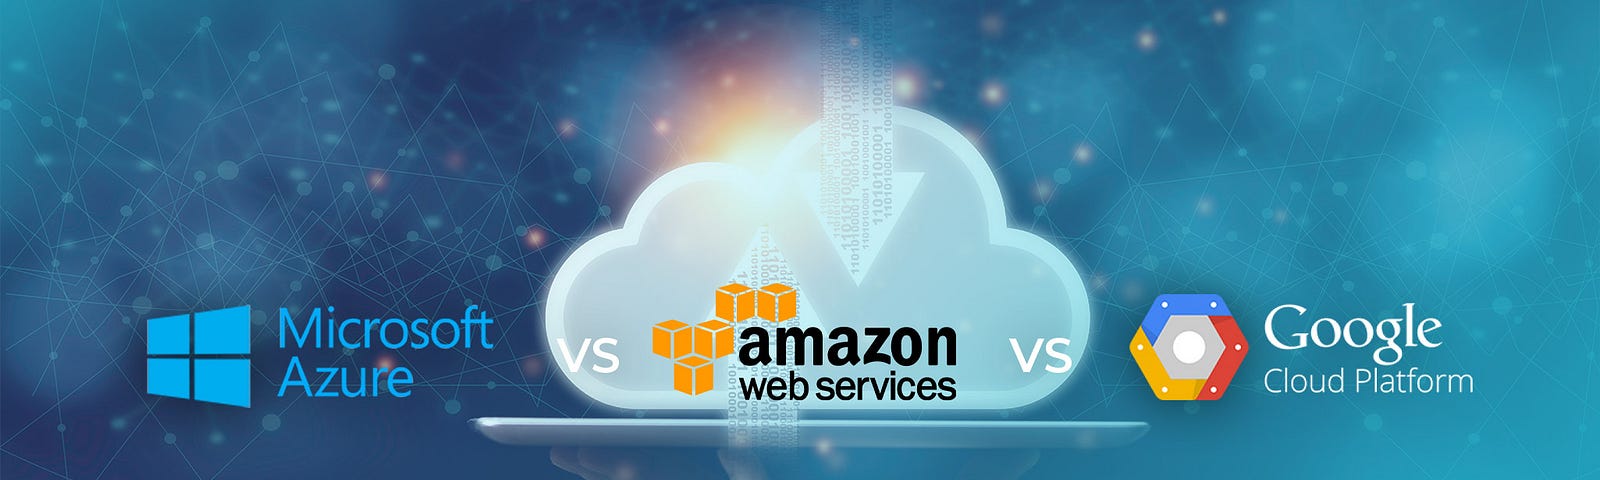 AWS, Azure and Google Cloud — which cloud service to choose?